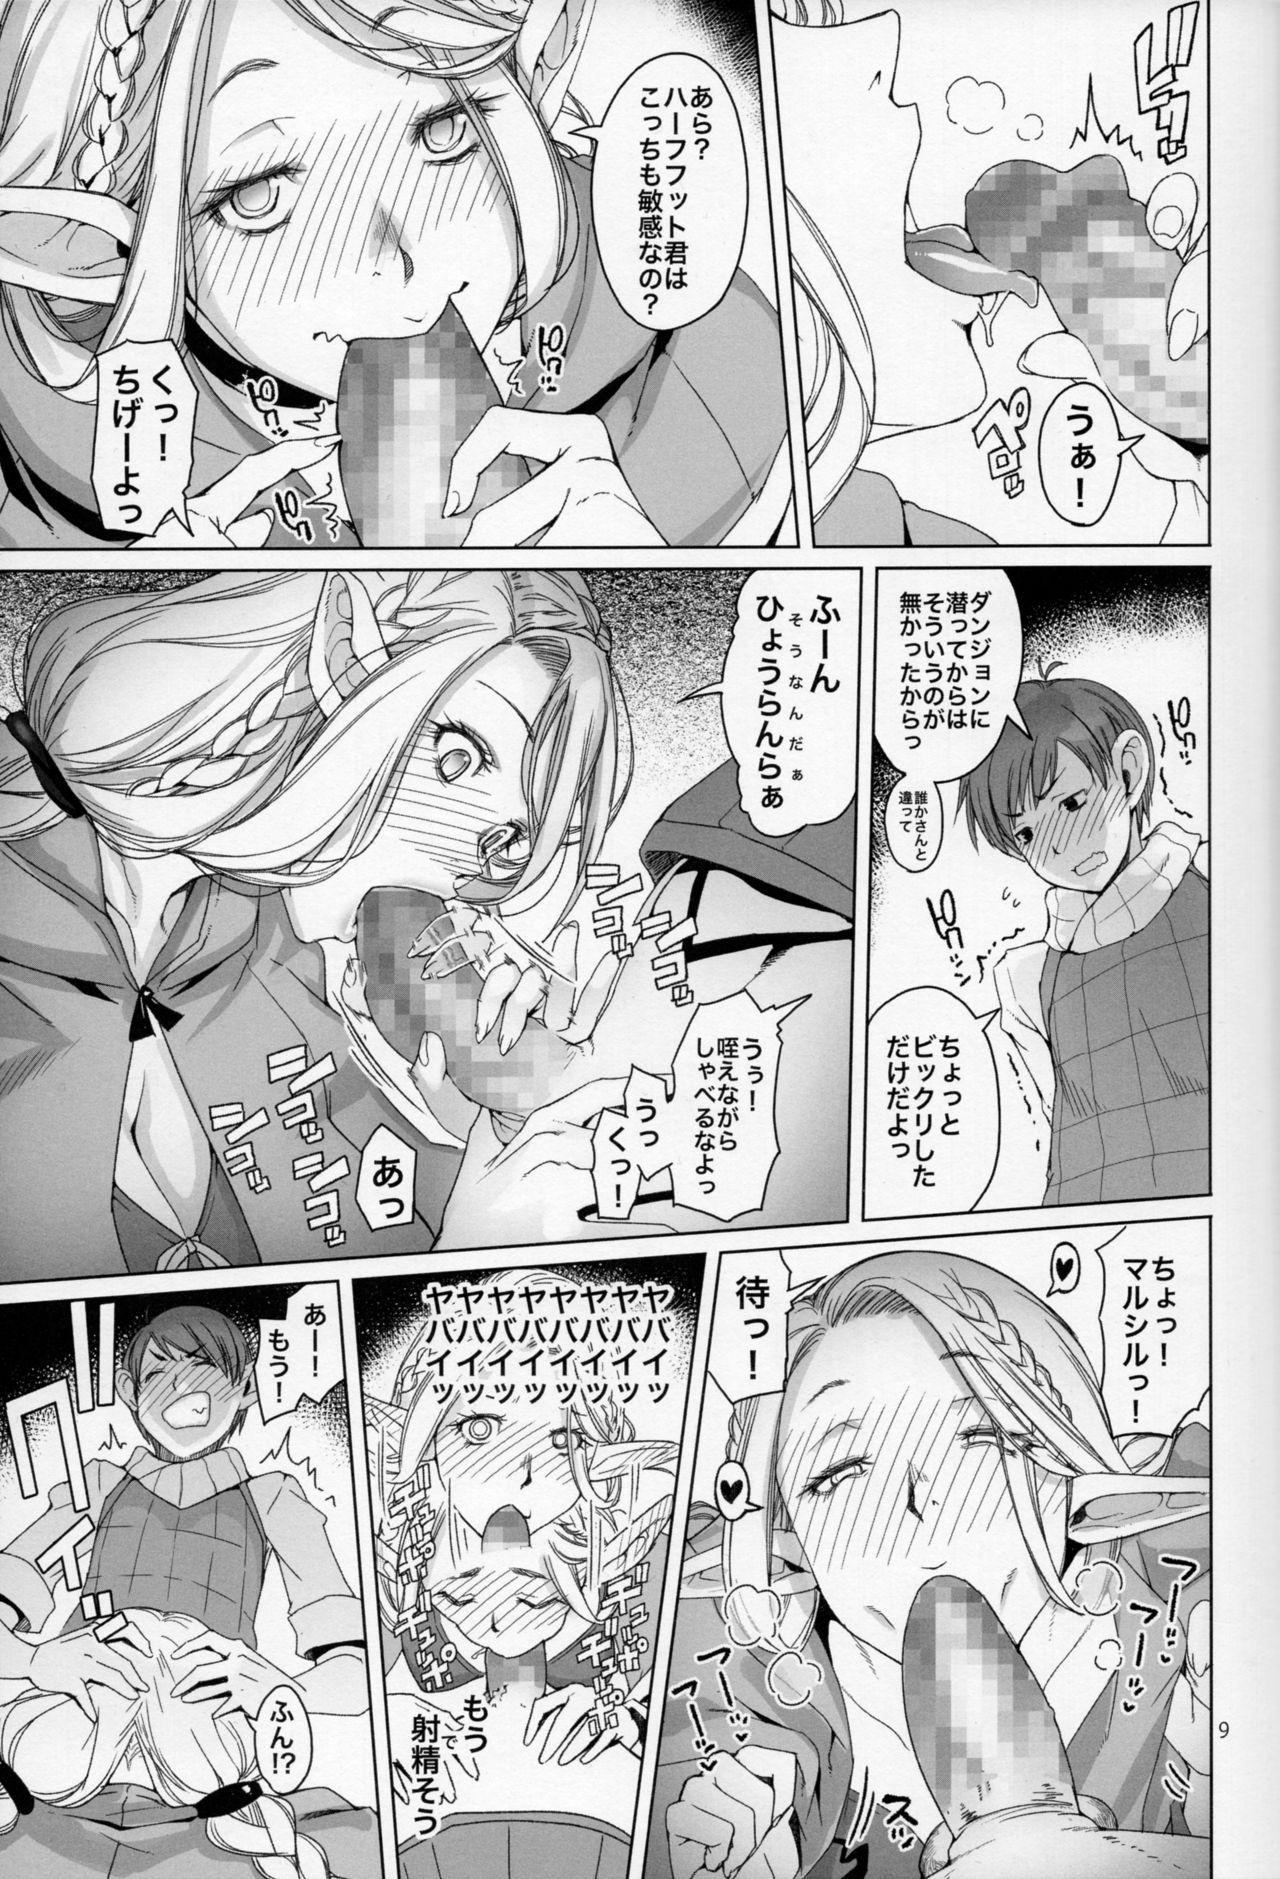 Animated Marchil Meshi - Dungeon meshi Story - Page 8